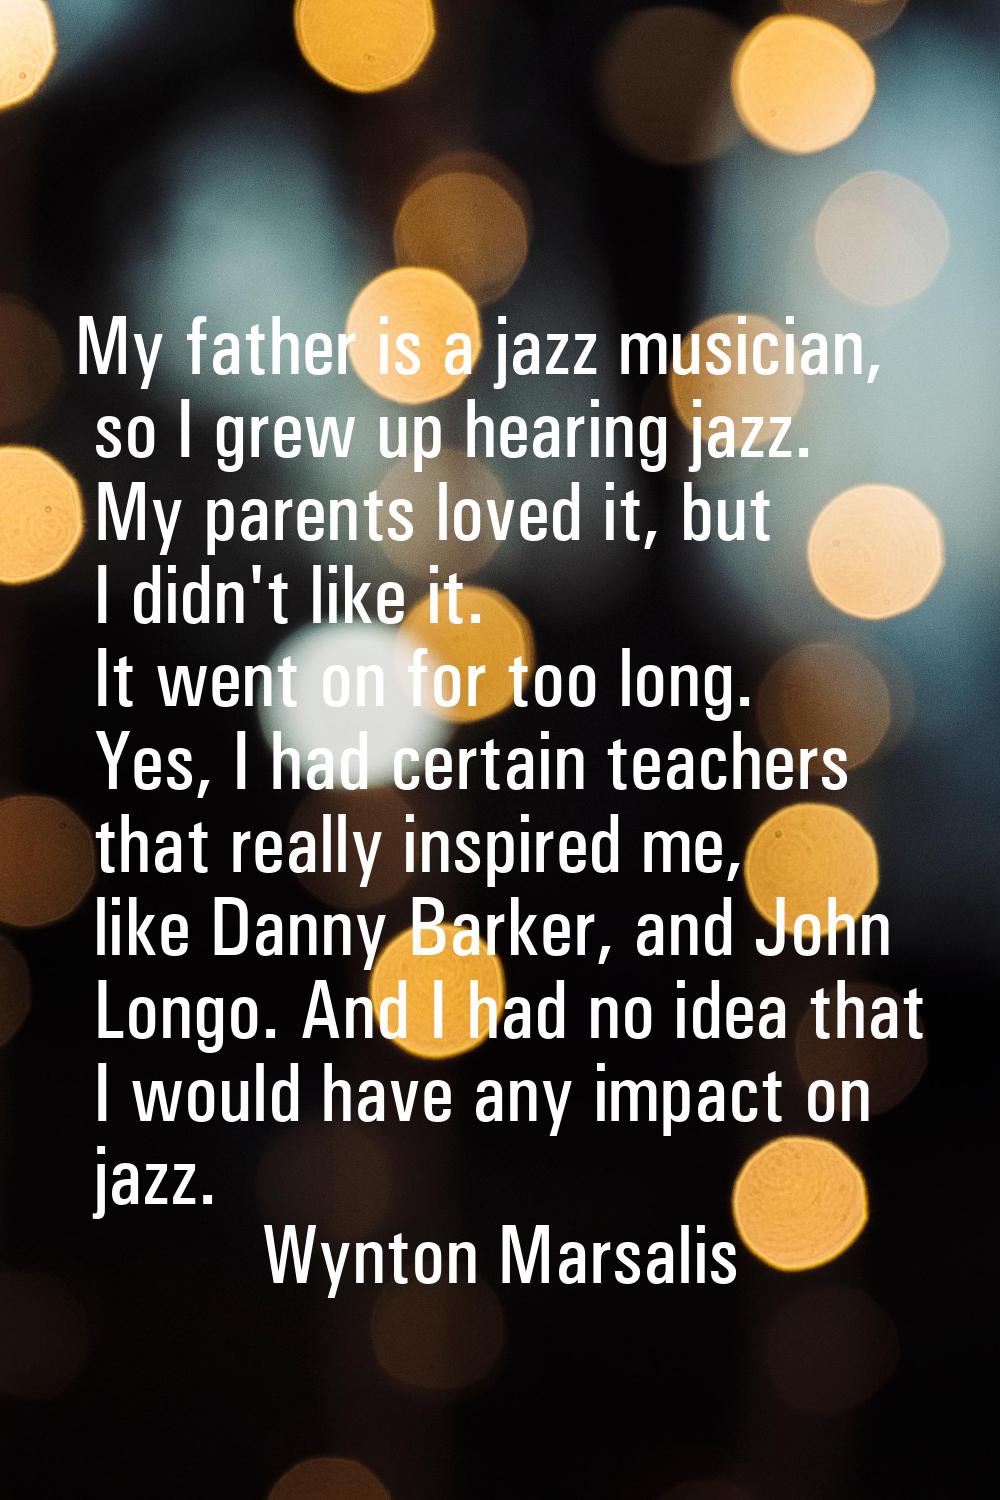 My father is a jazz musician, so I grew up hearing jazz. My parents loved it, but I didn't like it.